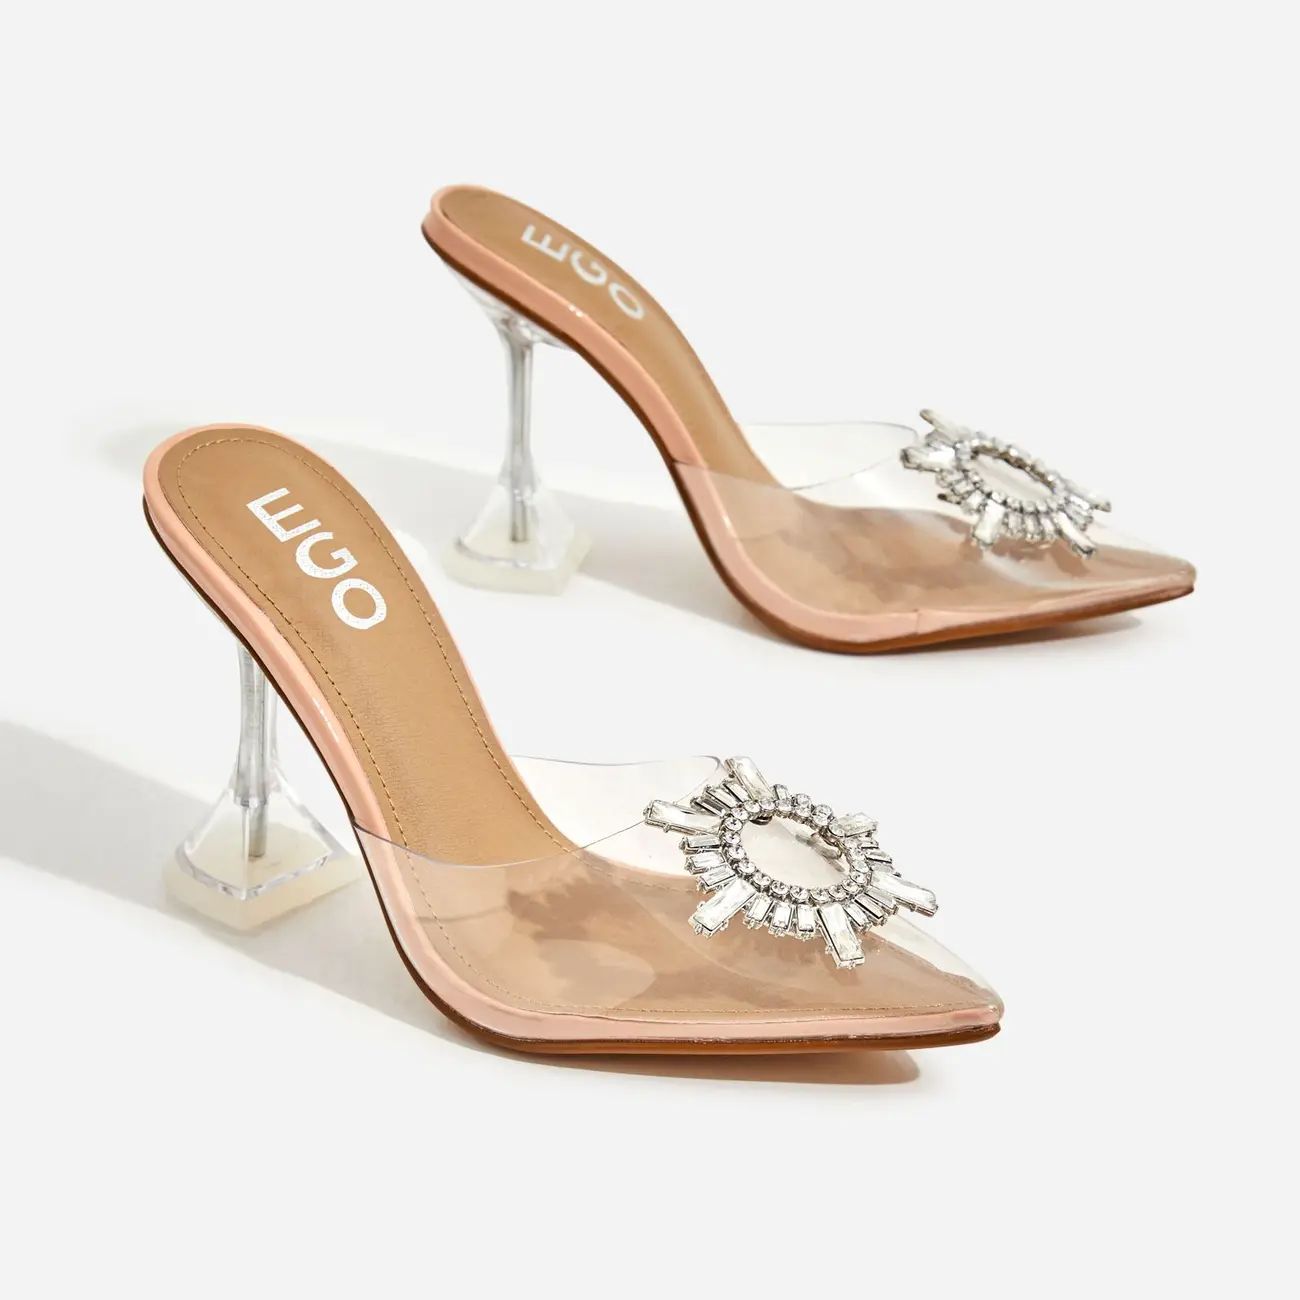 Midnight Diamante Detail Perspex Clear Heel Mule In Nude Patent | EGO Shoes (US & Canada)